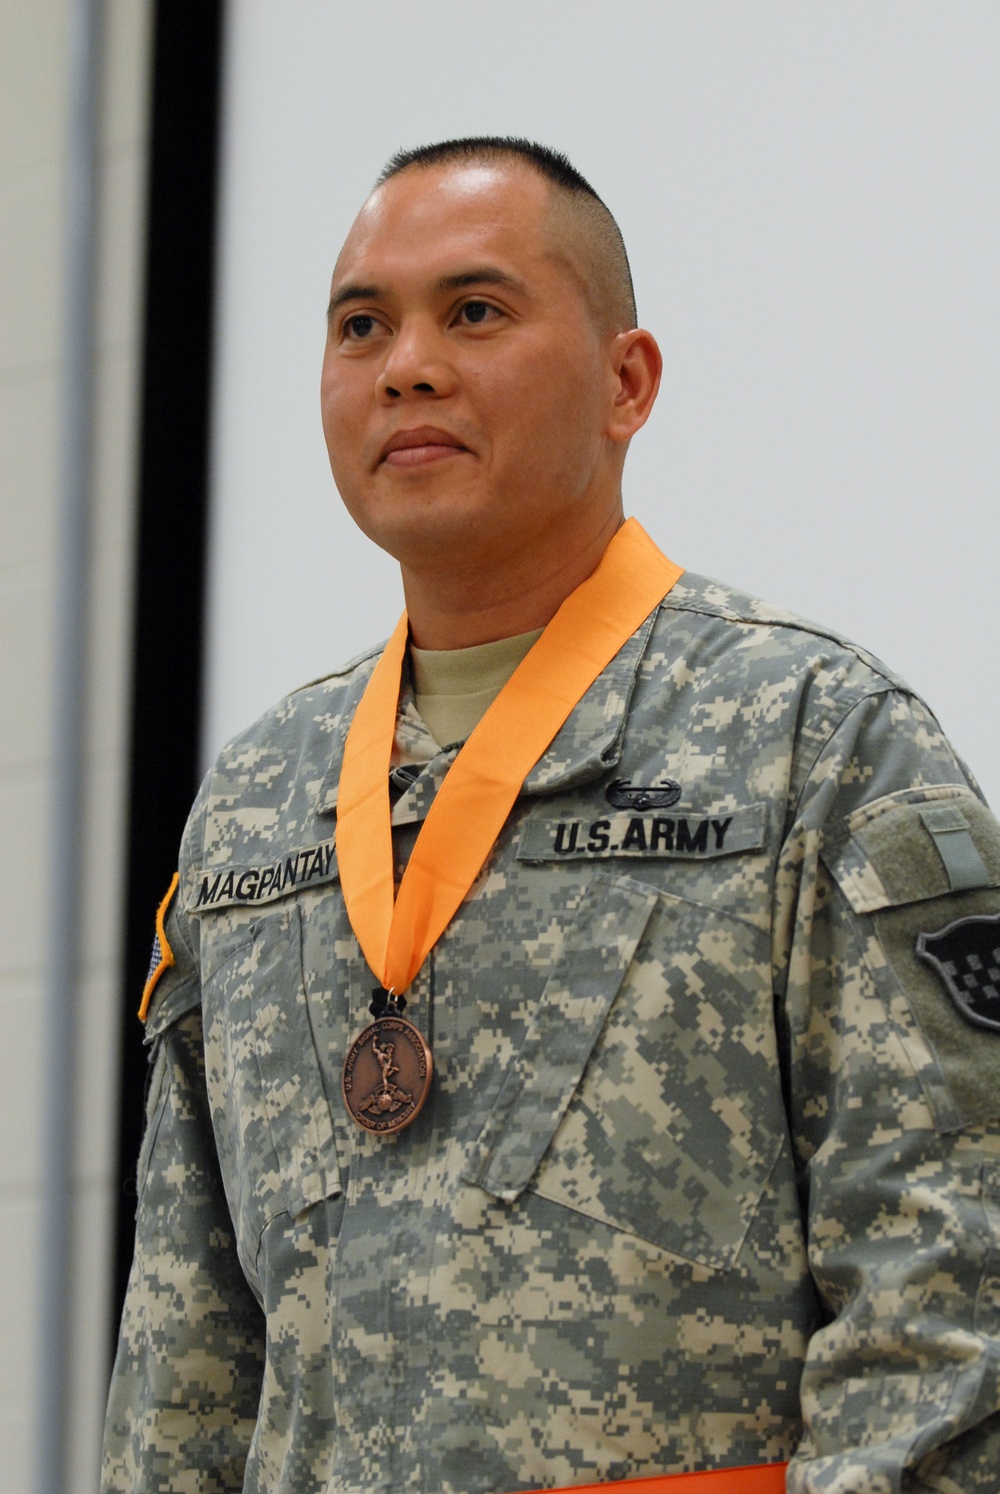 99th RSC soldier ‘walks with the Gods’